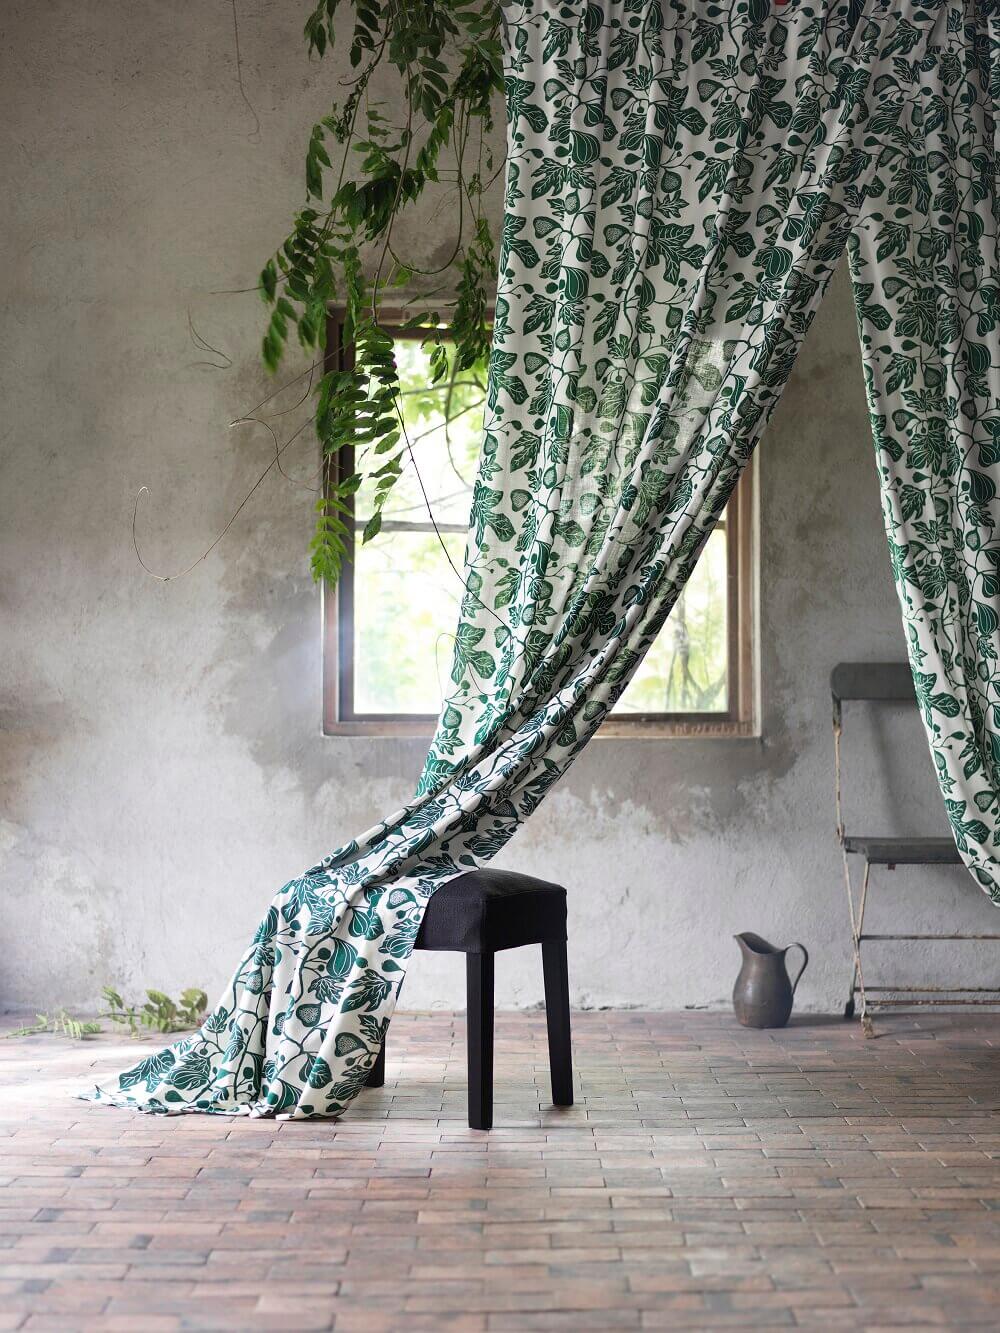 ikea spring collection 2020 mindful living nordroom4 IKEA Spring Collection 2020: Mindful Living and Close to Nature